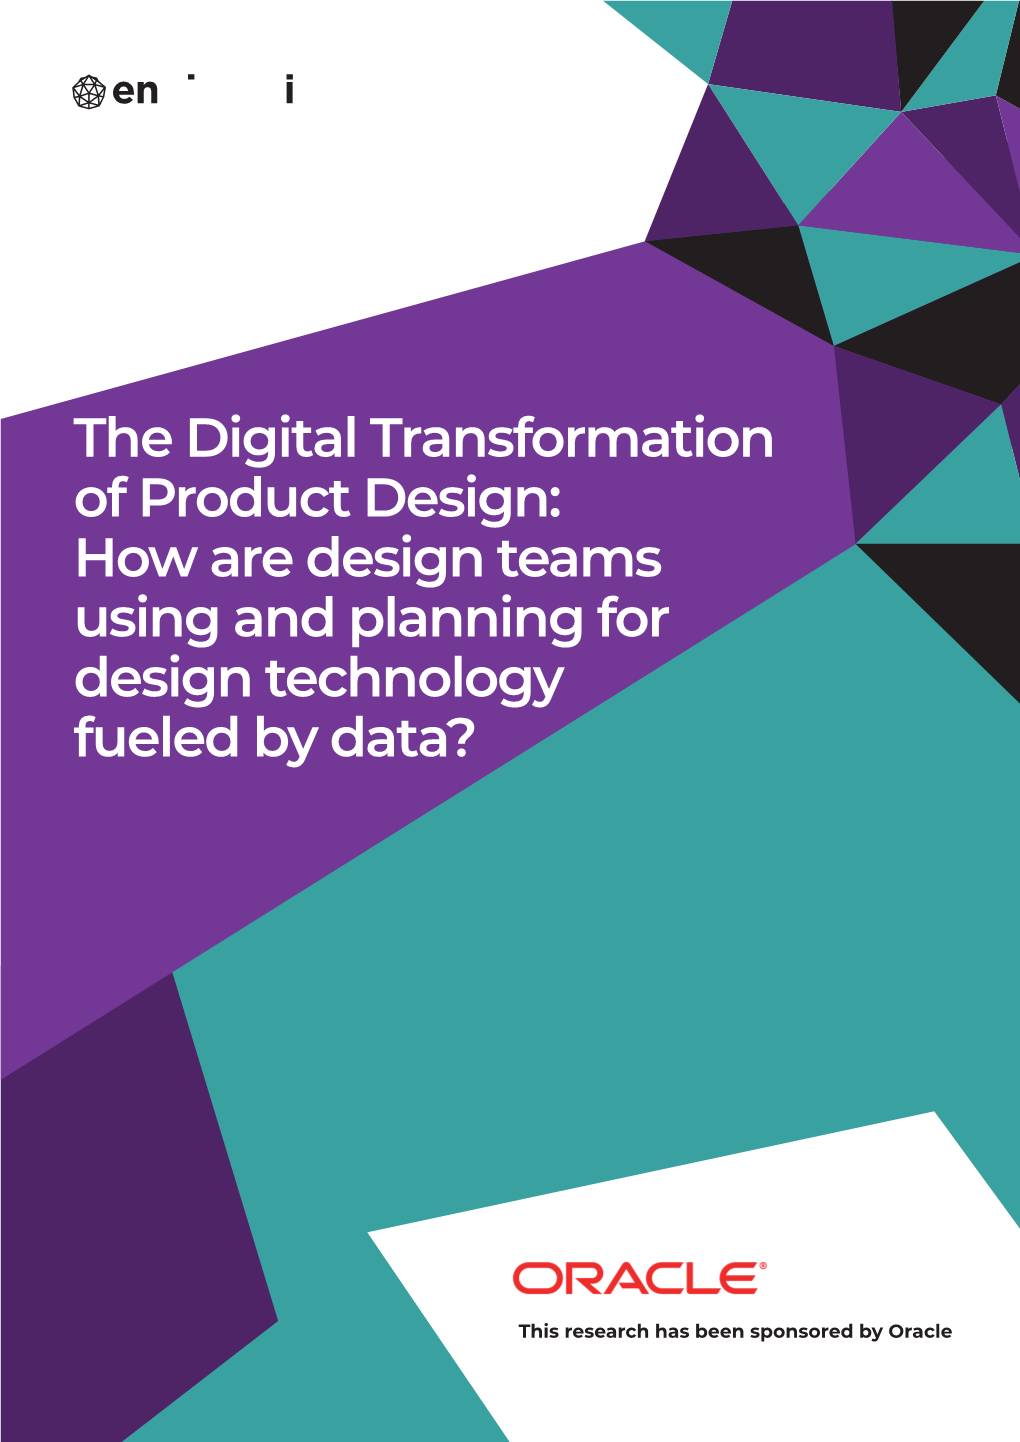 The Digital Transformation of Product Design: How Are Design Teams Using and Planning for Design Technology Fueled by Data?